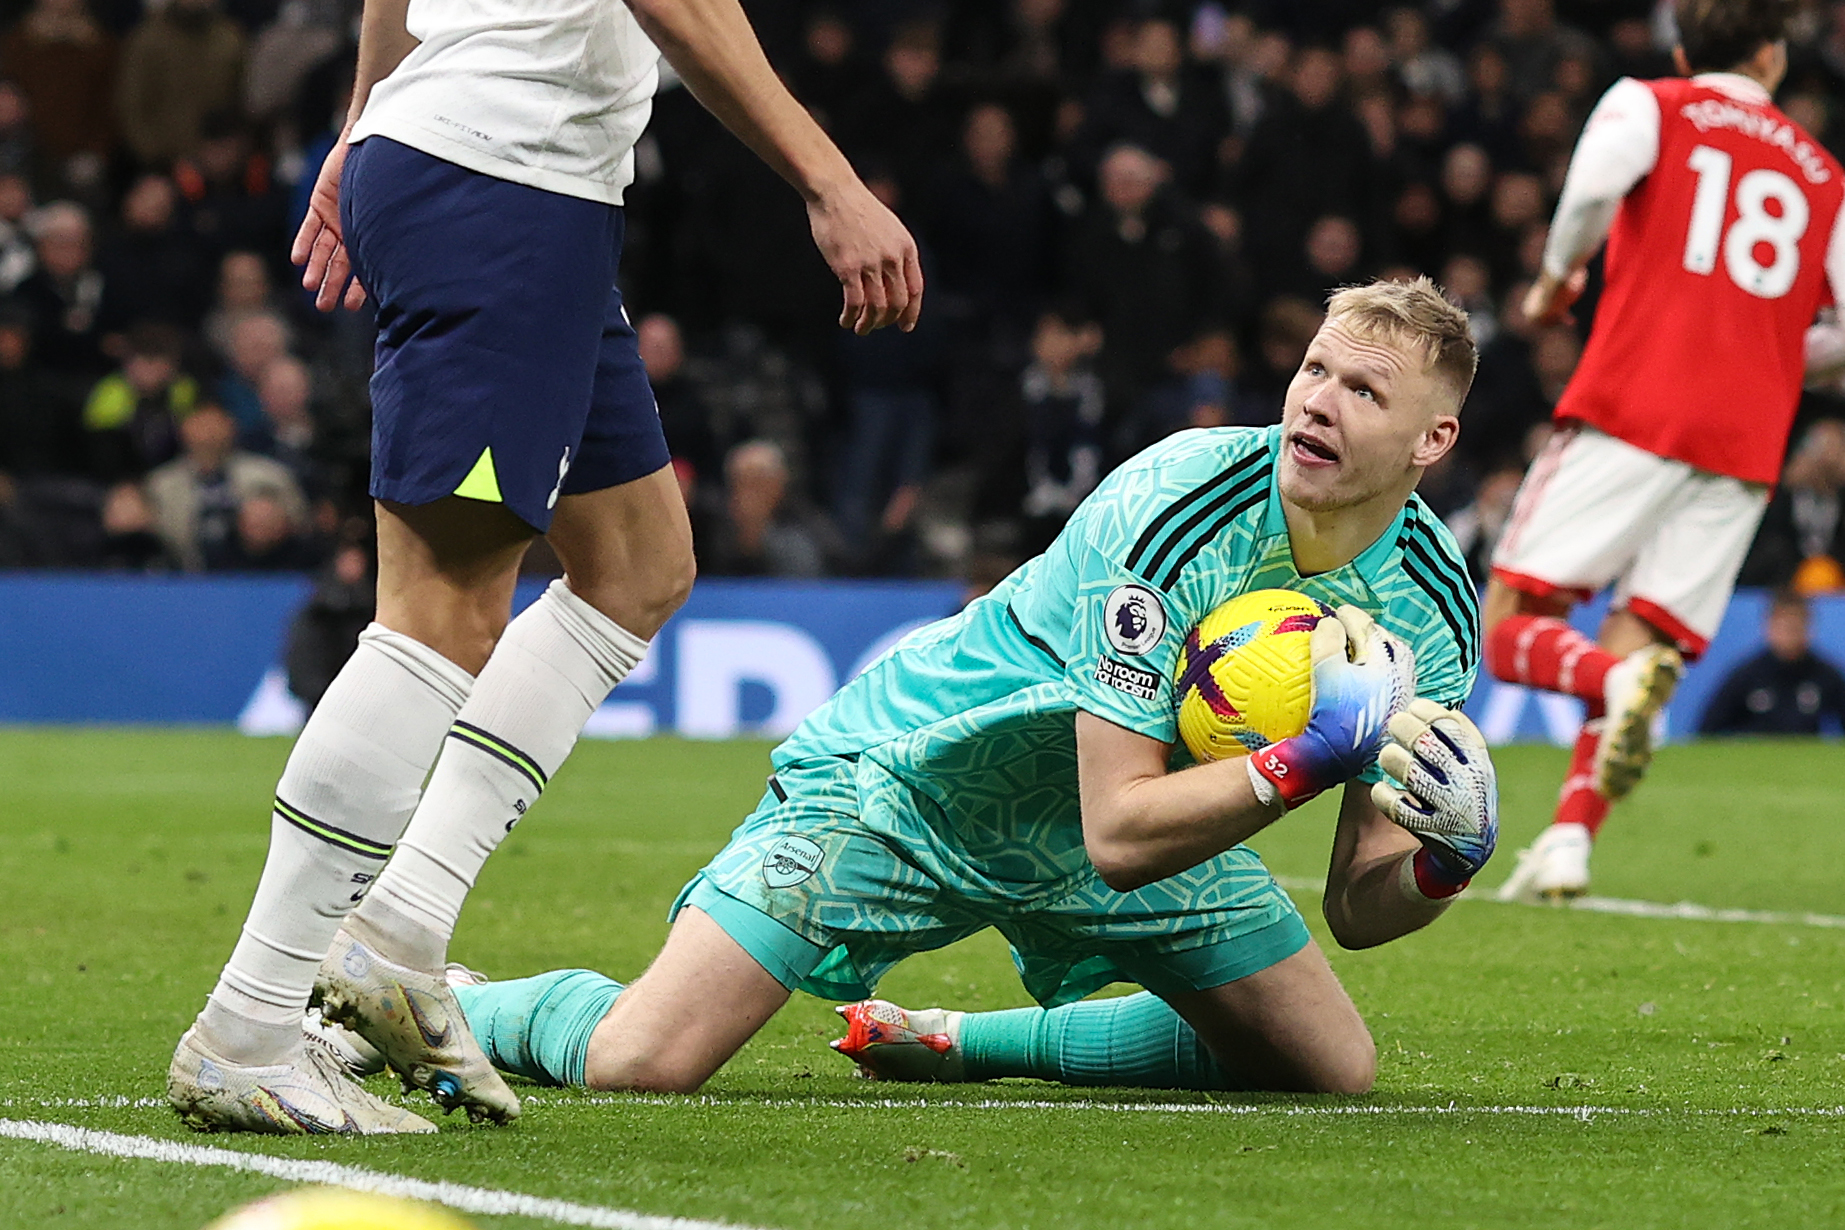 Arsenal keeper Aaron Ramsdale nominated for Premier League Save of the Month